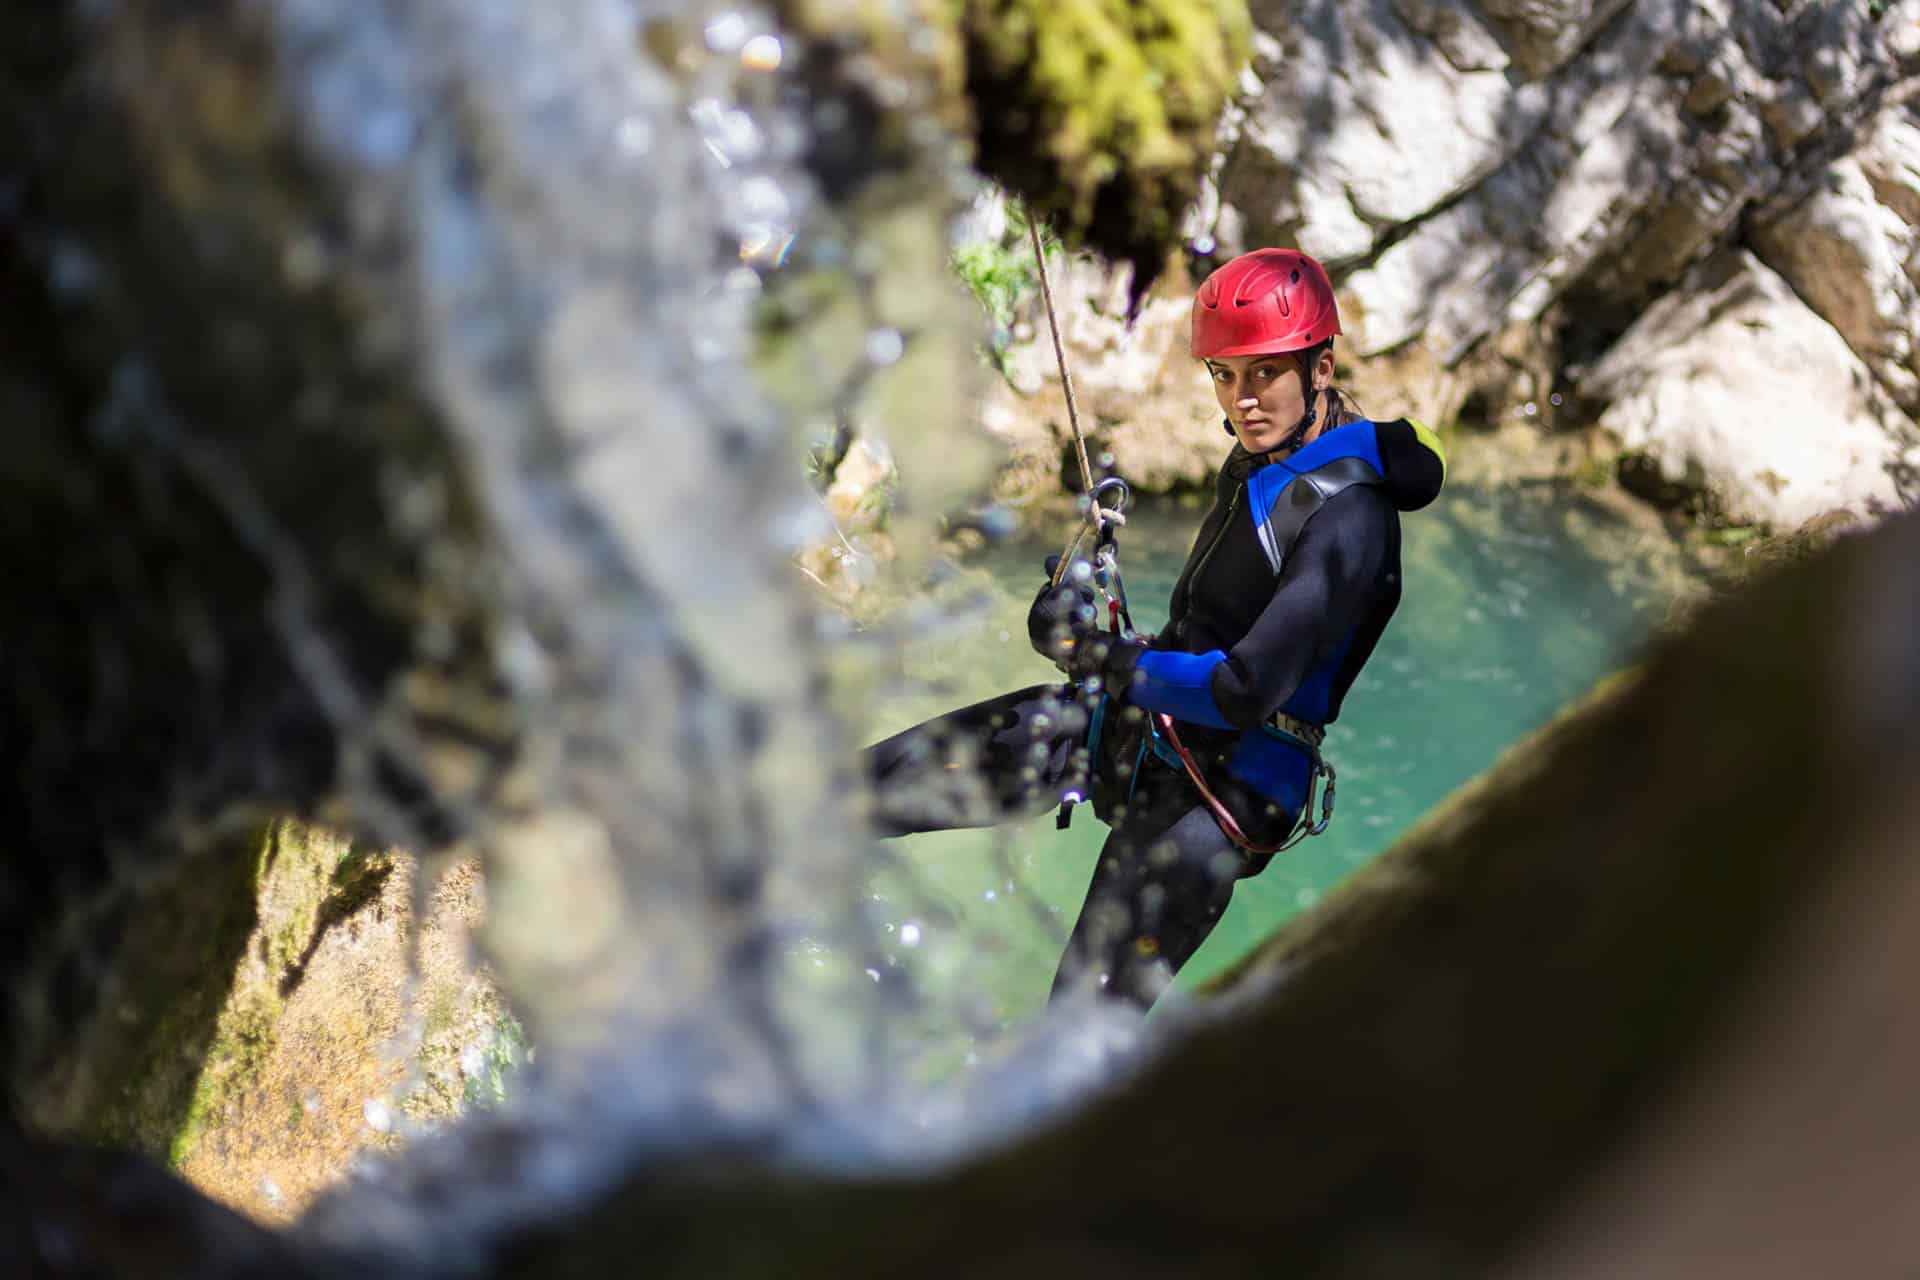 Woman rappelling in the canyon adventure with waterfall and turquoise water in the background.